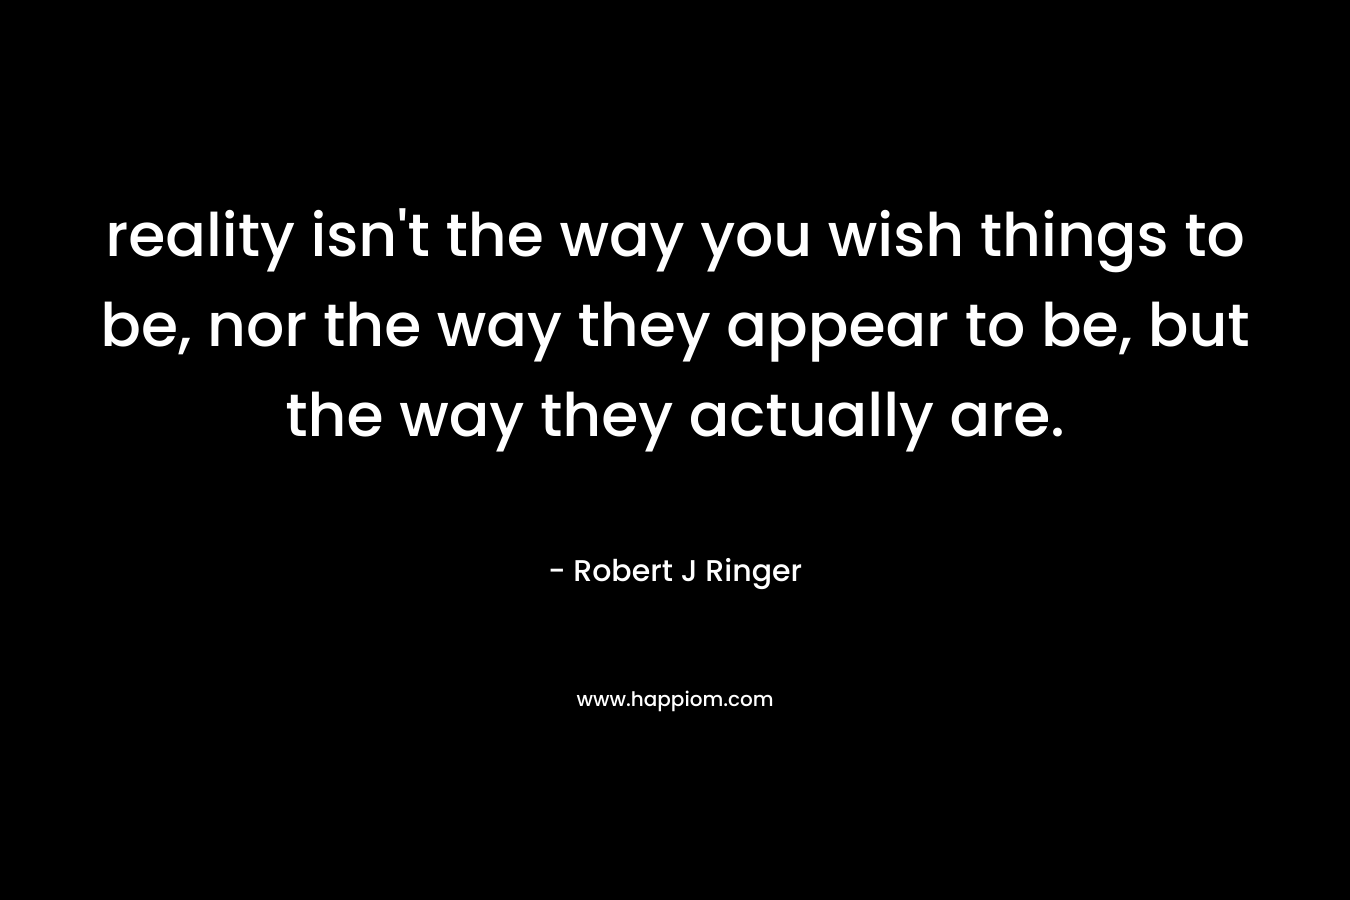 reality isn’t the way you wish things to be, nor the way they appear to be, but the way they actually are. – Robert J Ringer